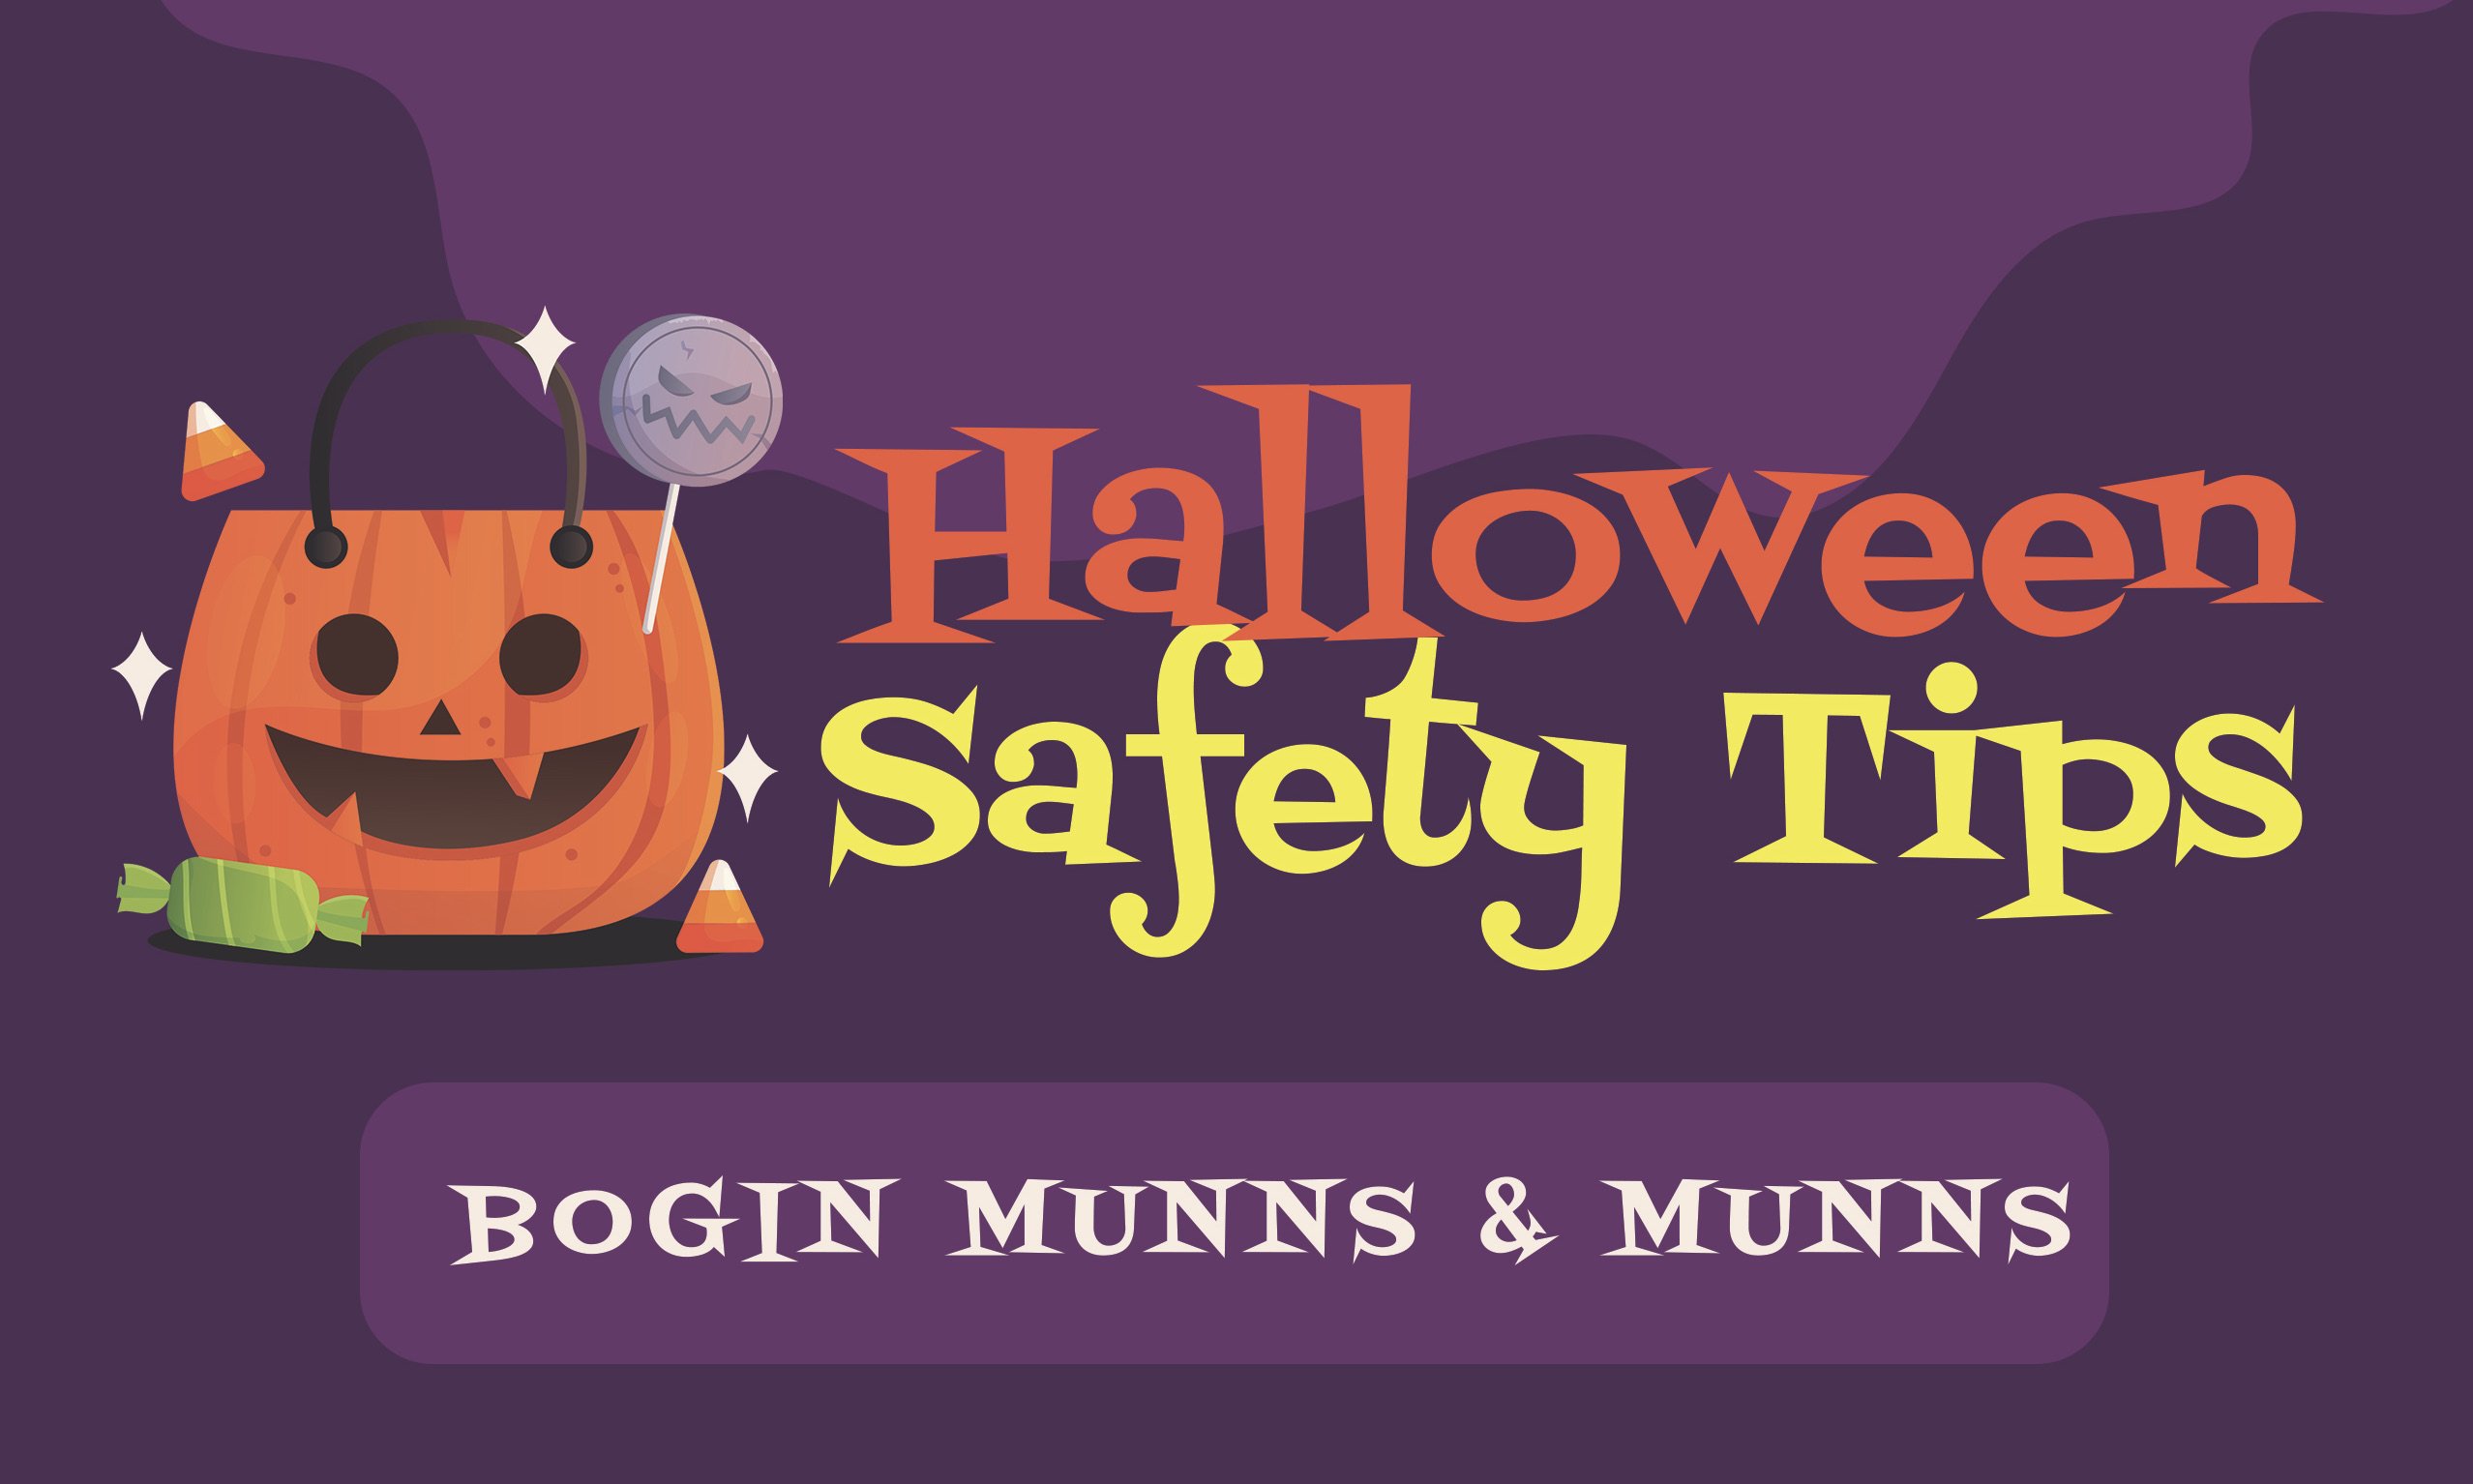 Halloween Safety Tips – Everything you need to know to keep your kids safe on Halloween